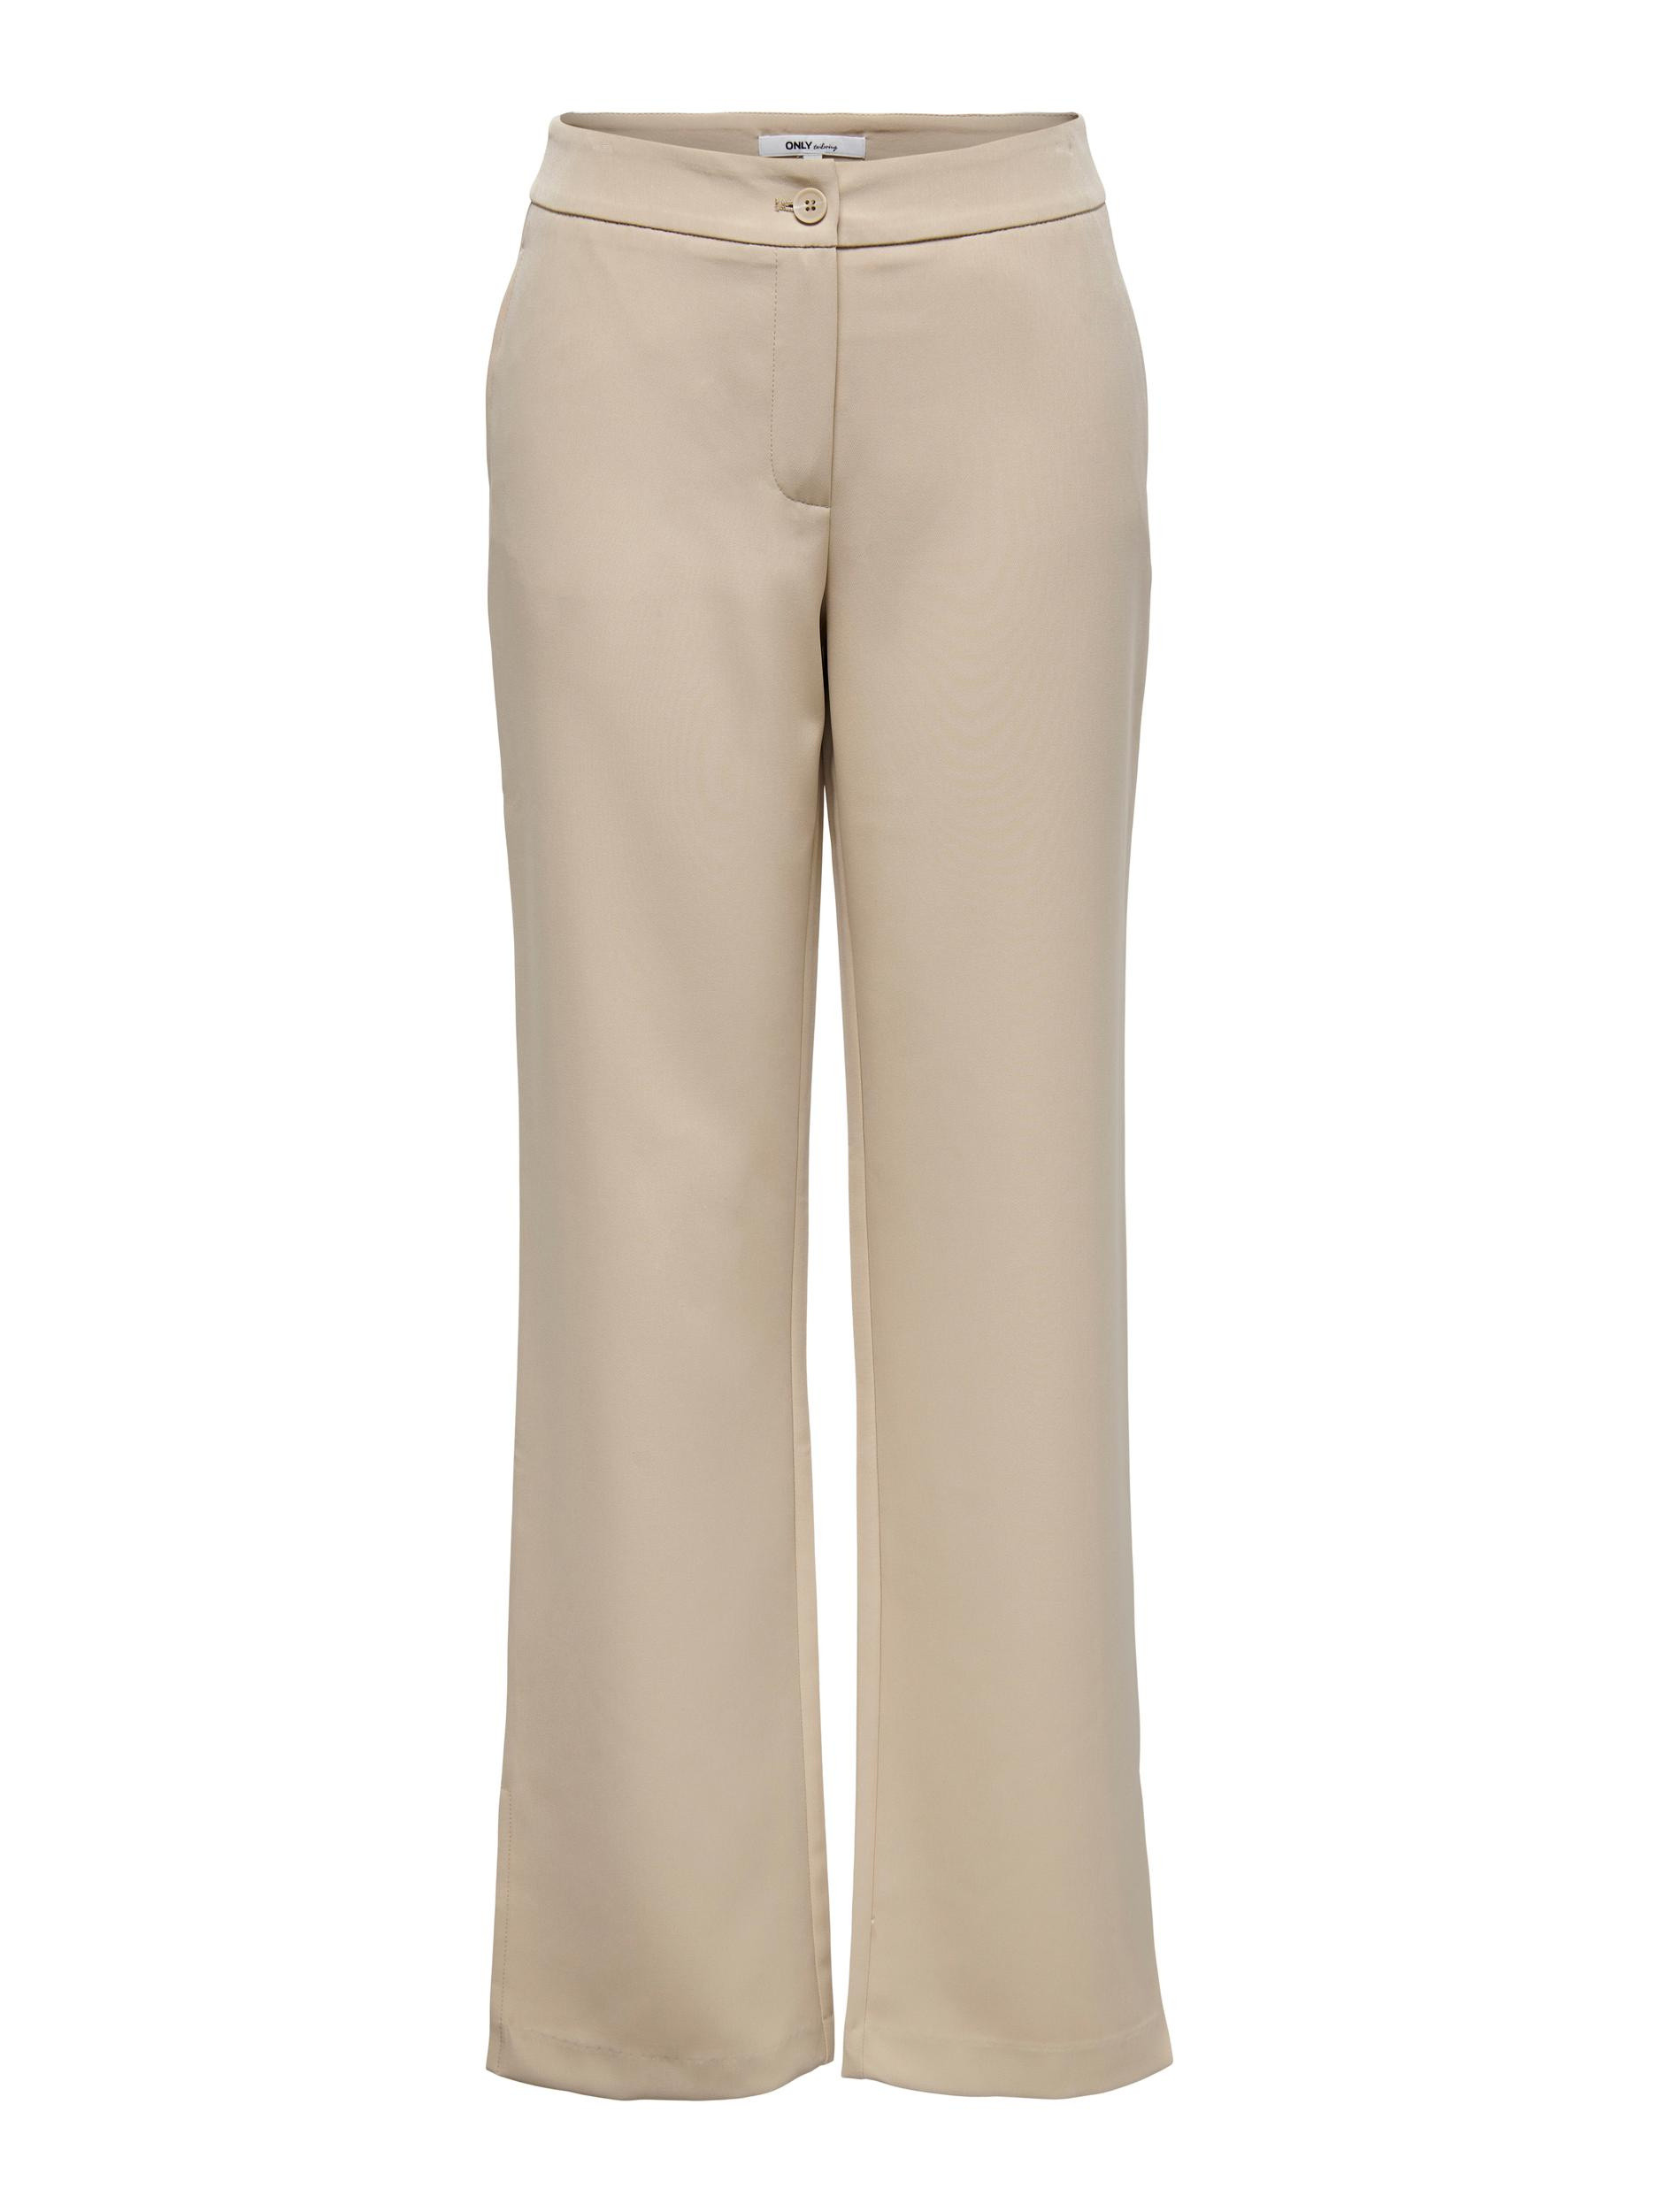 Only - Pantaloni straight fit, Beige chiaro, large image number 0